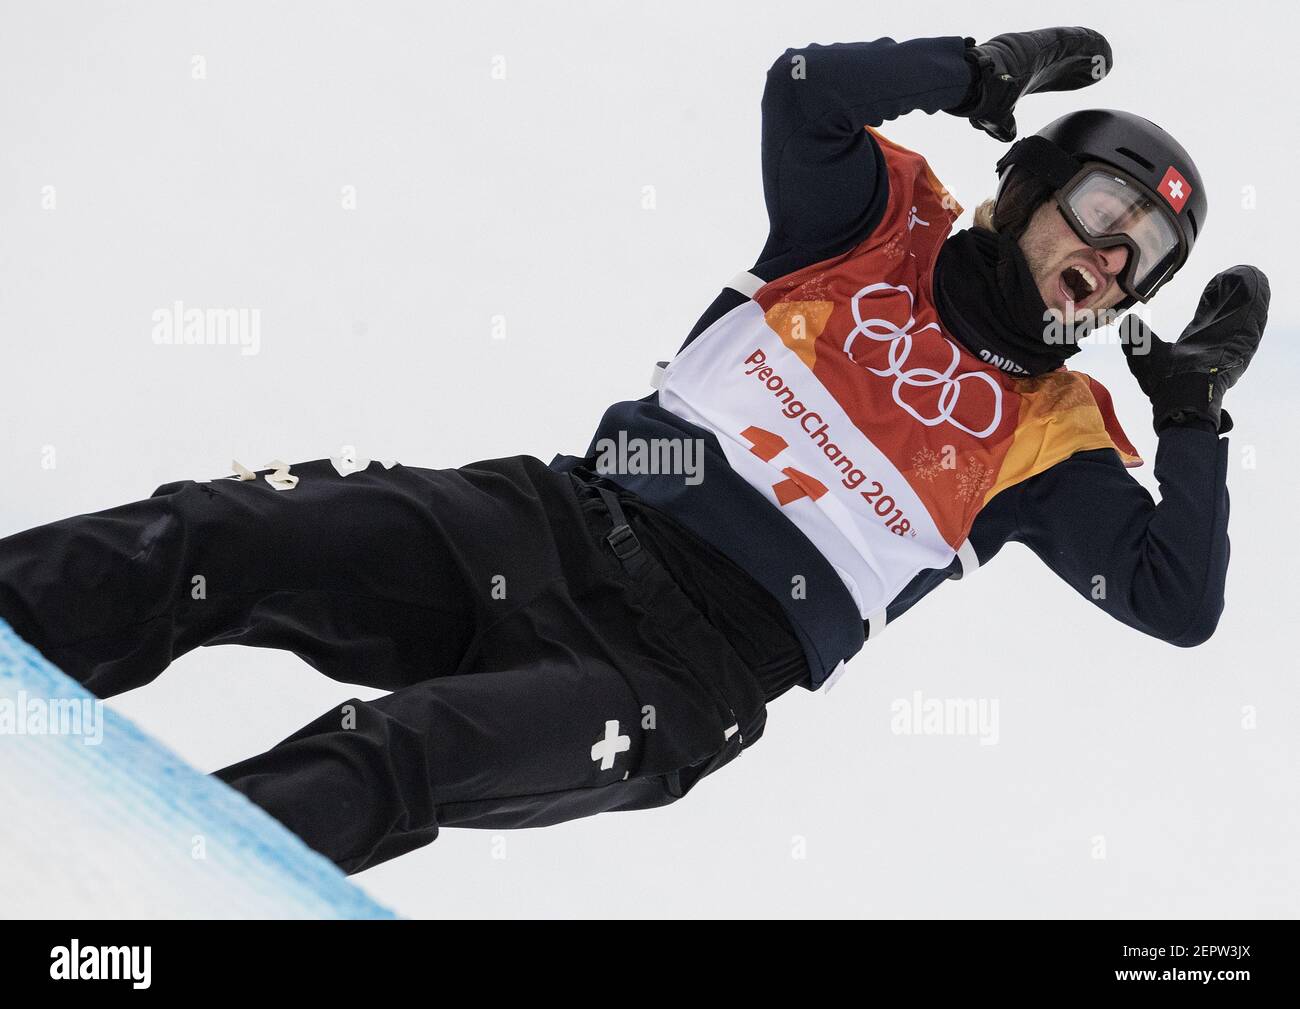 Patrick Burgener reacts after a run in the Men's Half Pipe Snowboard finals at Phoenix Park in South Korea on Wednesday, Feb. 14, 2018, during the Pyeongchang Winter Olympics. (Photo by Carlos Gonzalez/Minneapolis Star Tribune/TNS/Sipa USA) Stock Photo